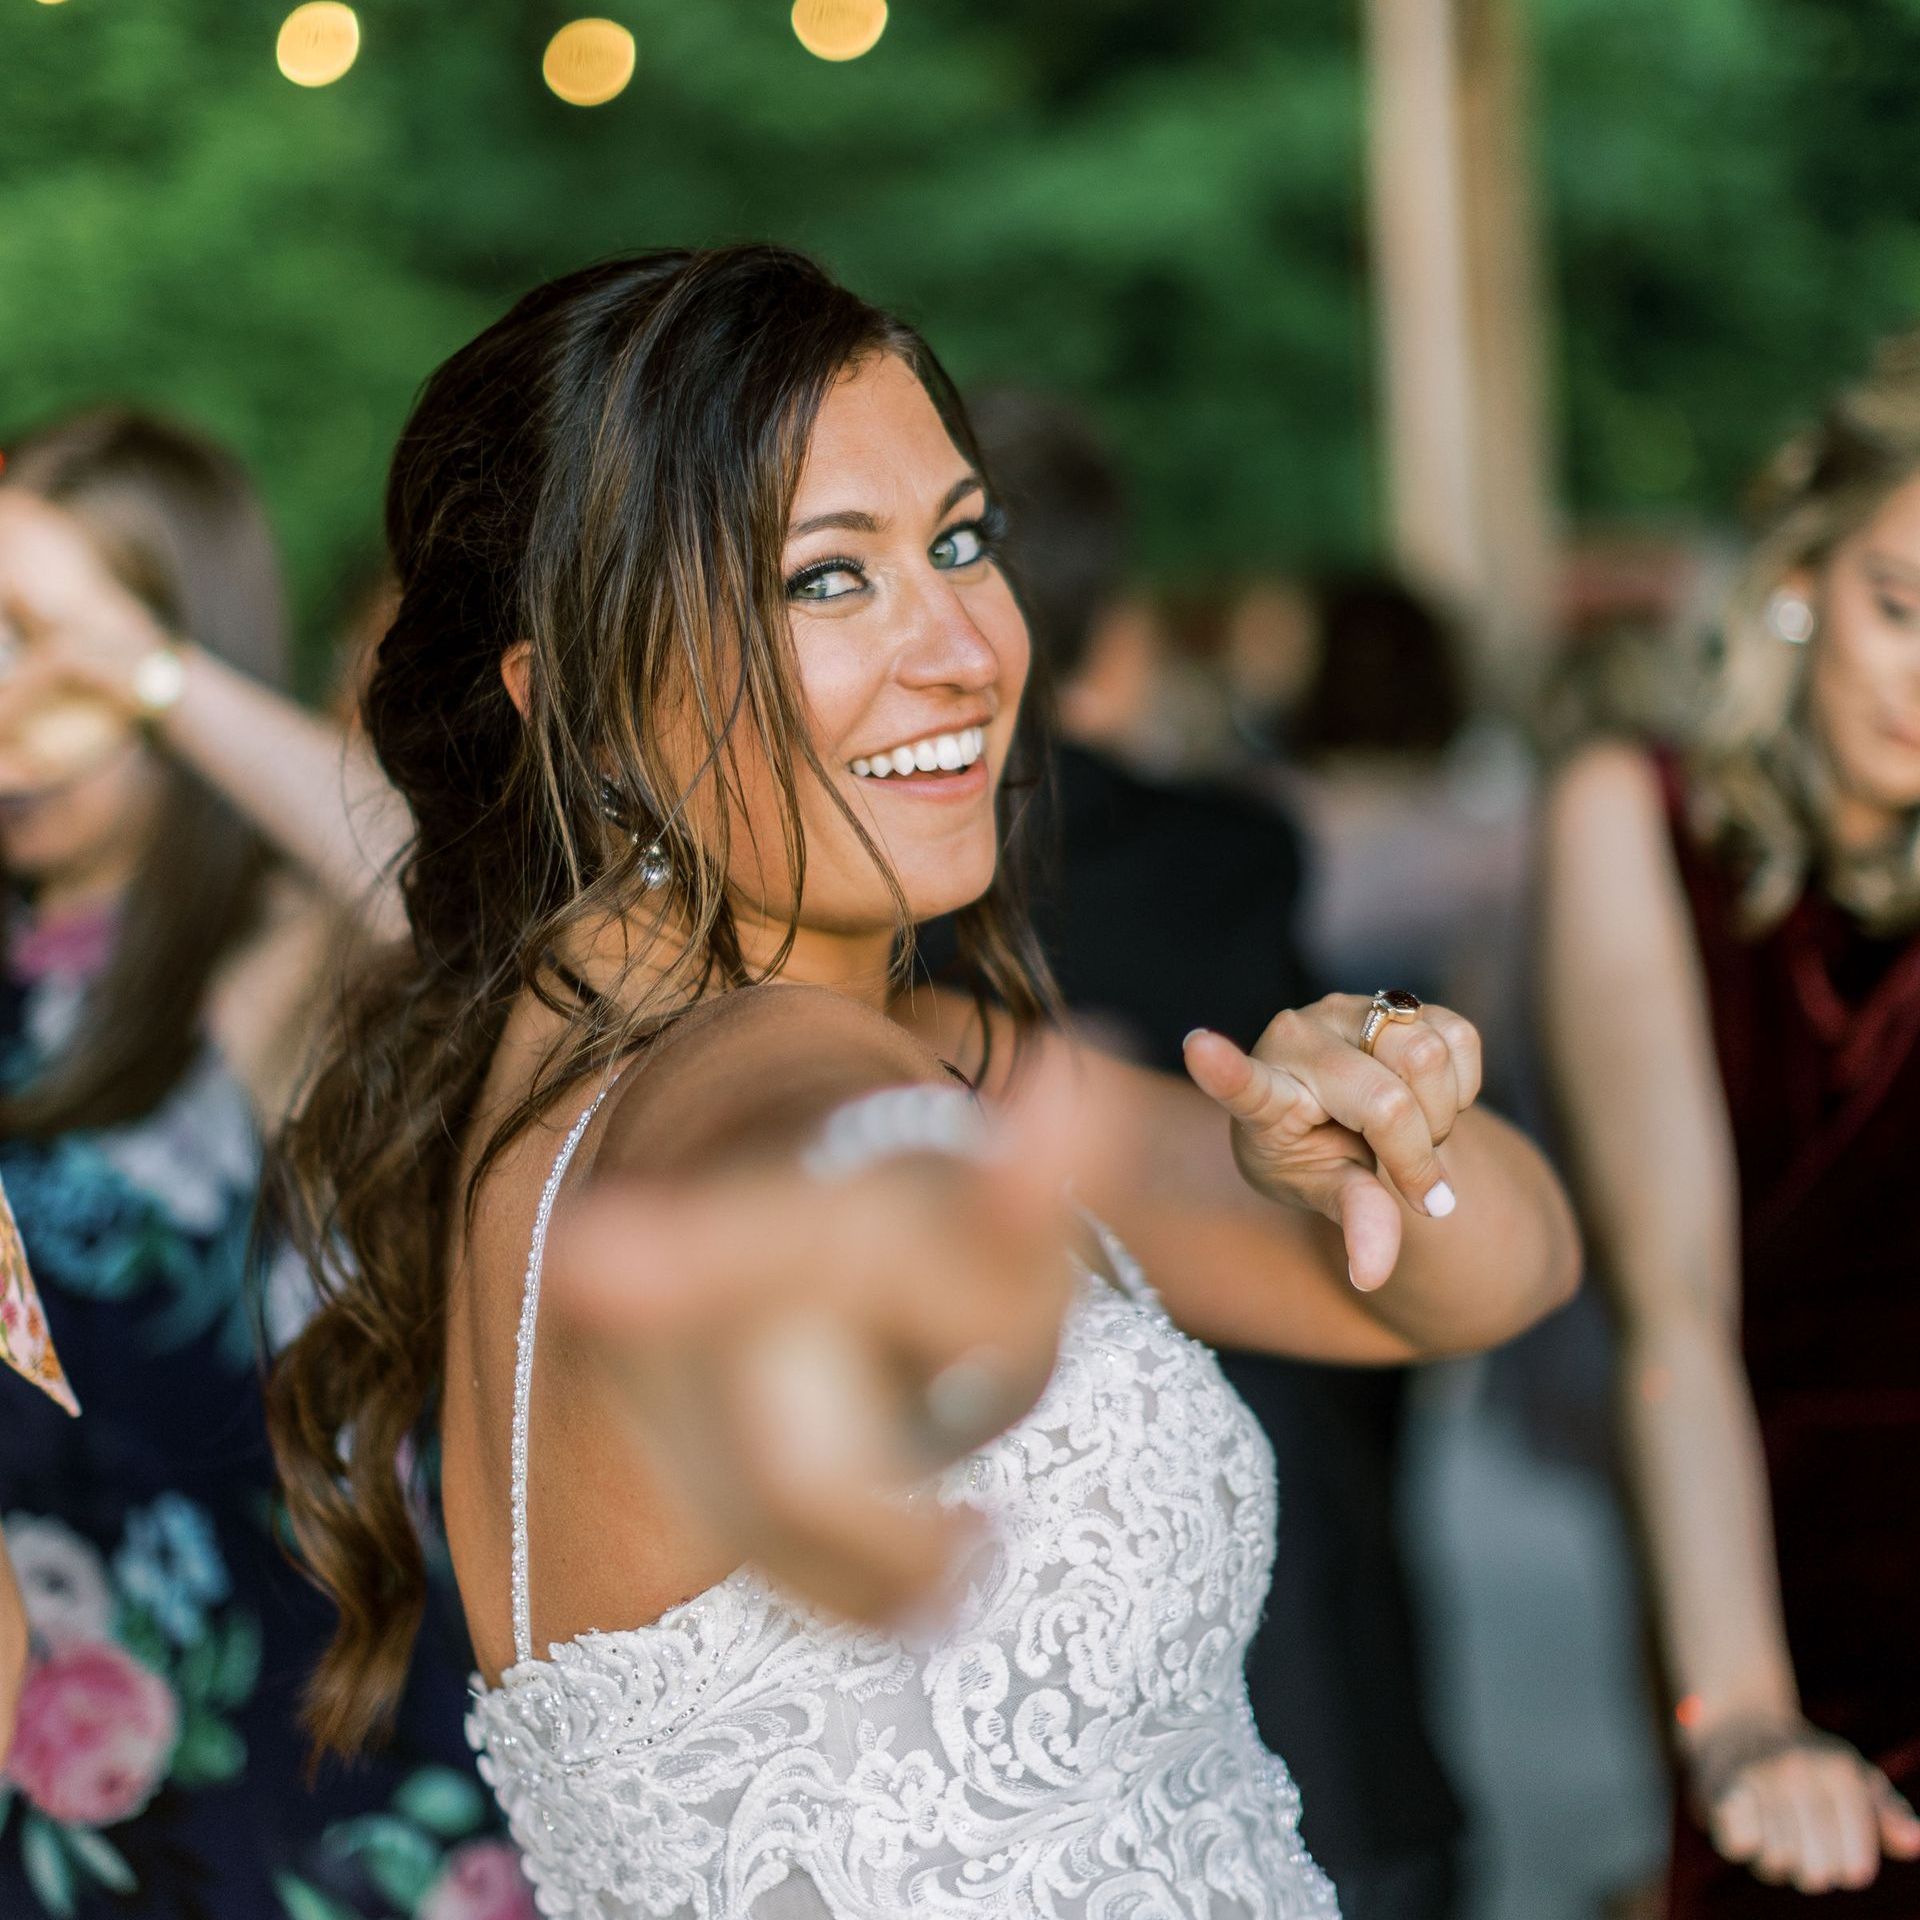 a woman in a wedding dress is dancing and smiling at the camera .